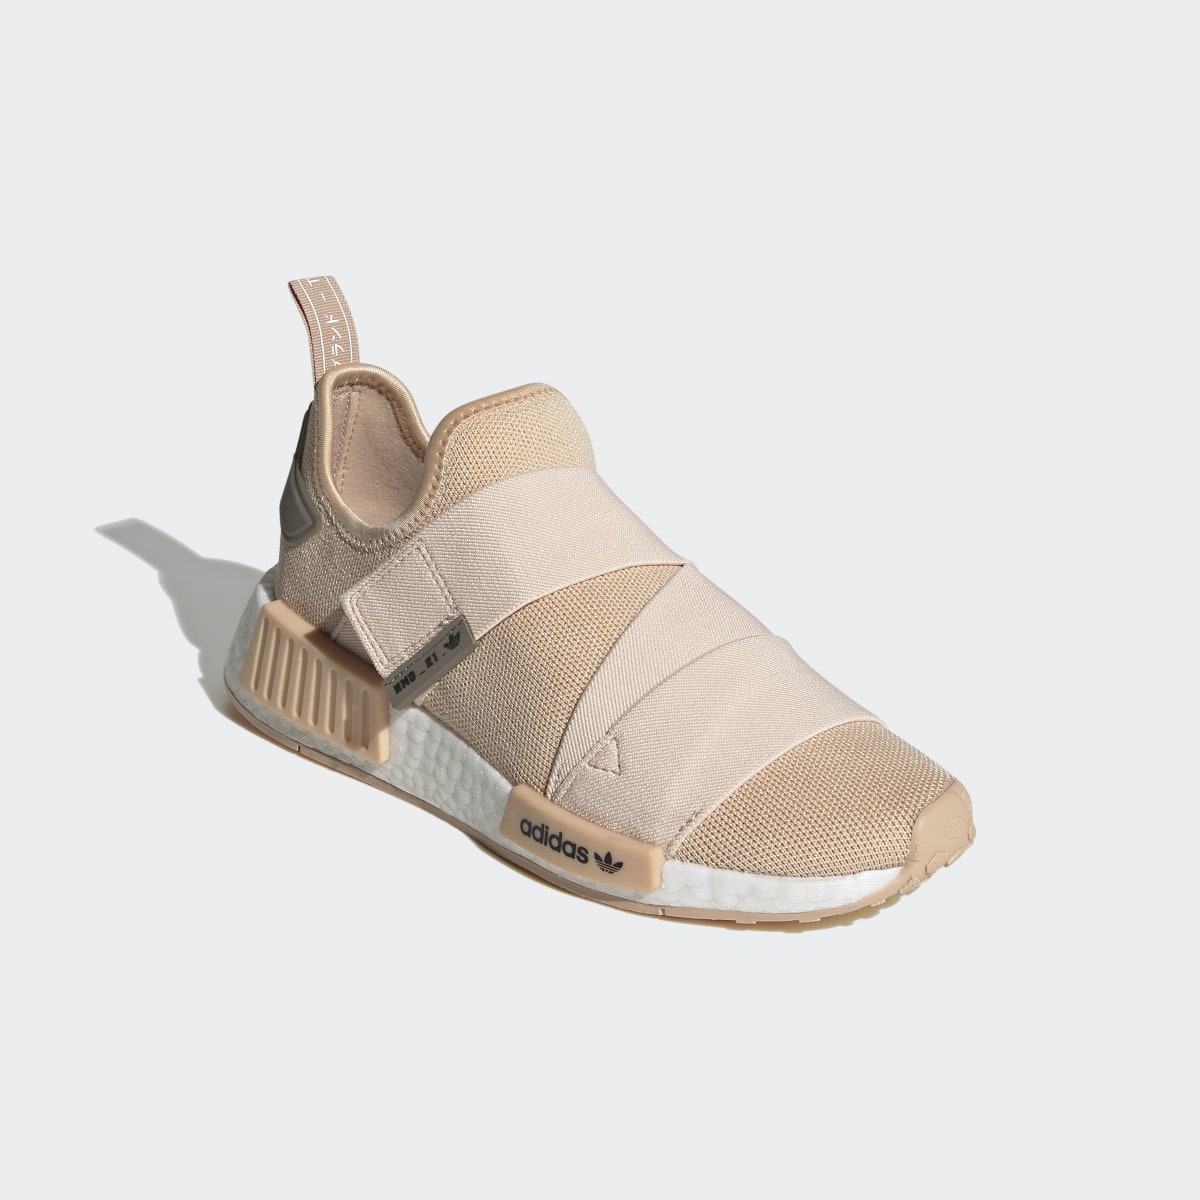 Adidas NMD_R1 Strap Shoes. 5